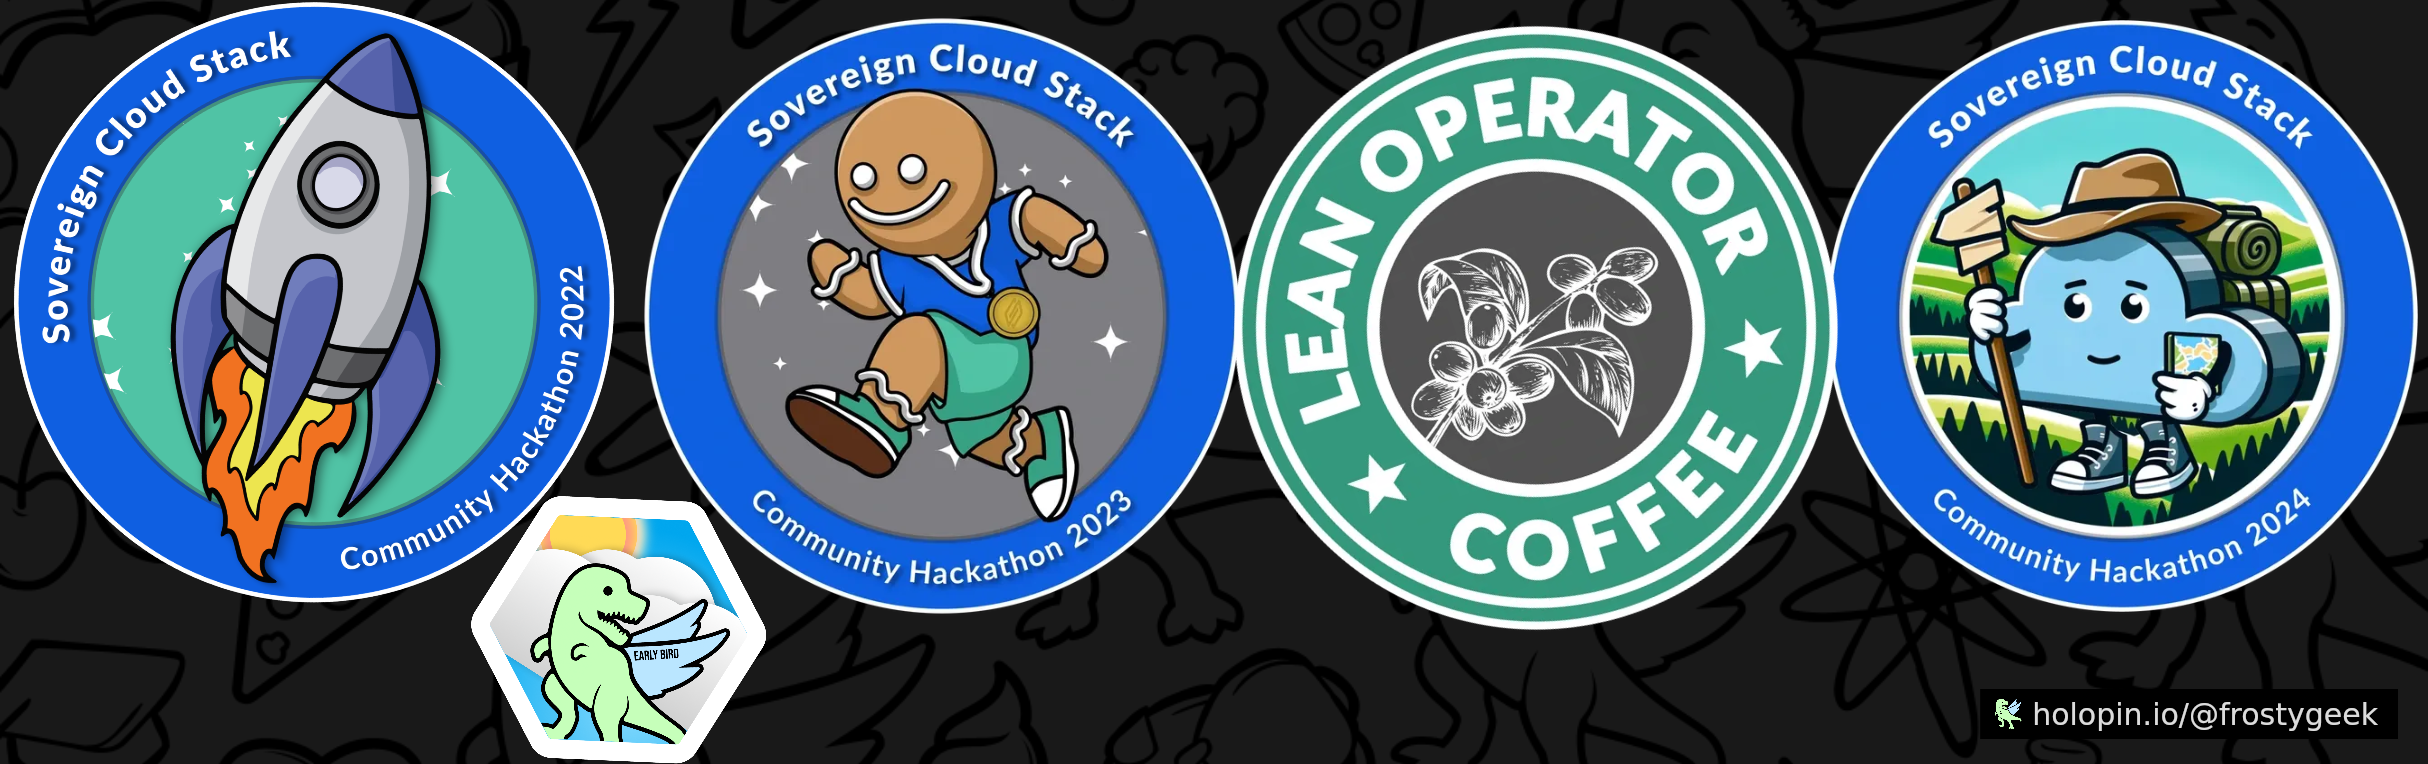 An image of @frostygeek's Holopin badges, which is a link to view their full Holopin profile